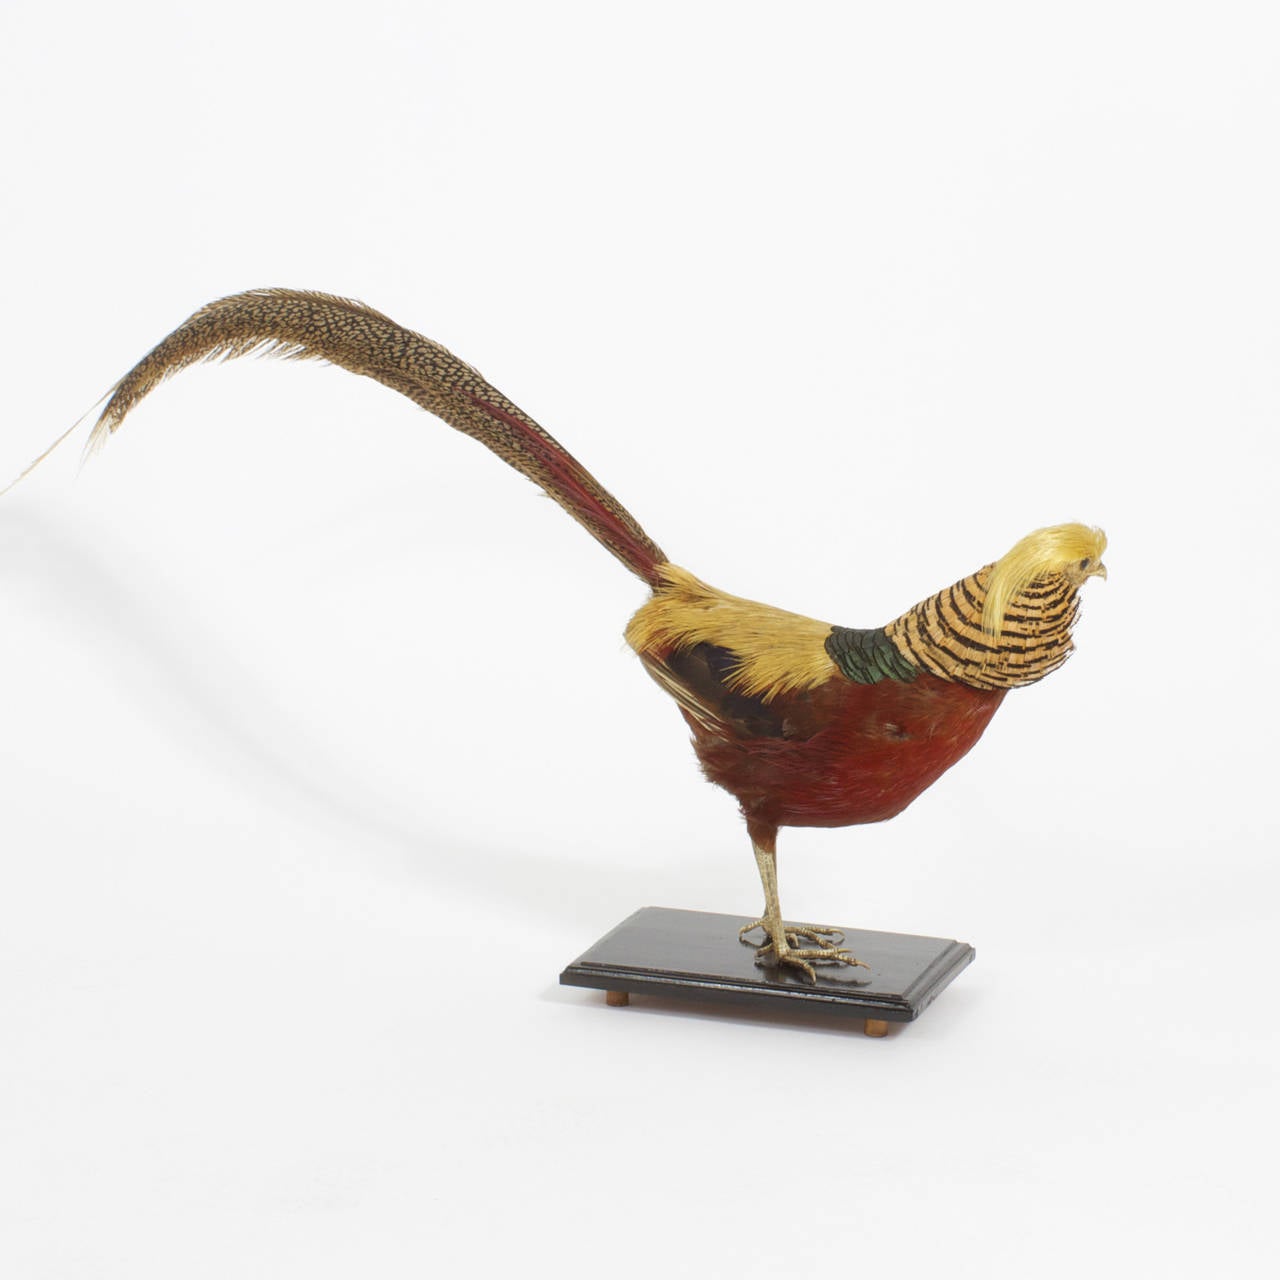 Here is a Victorian taxidermy pheasant with attitude. This bird is decked out in royal colored feathers of deep red and gold with a touch of brown with a graceful arched tail in brown and tan stripes and sporting a lock of blond on its head. Mounted